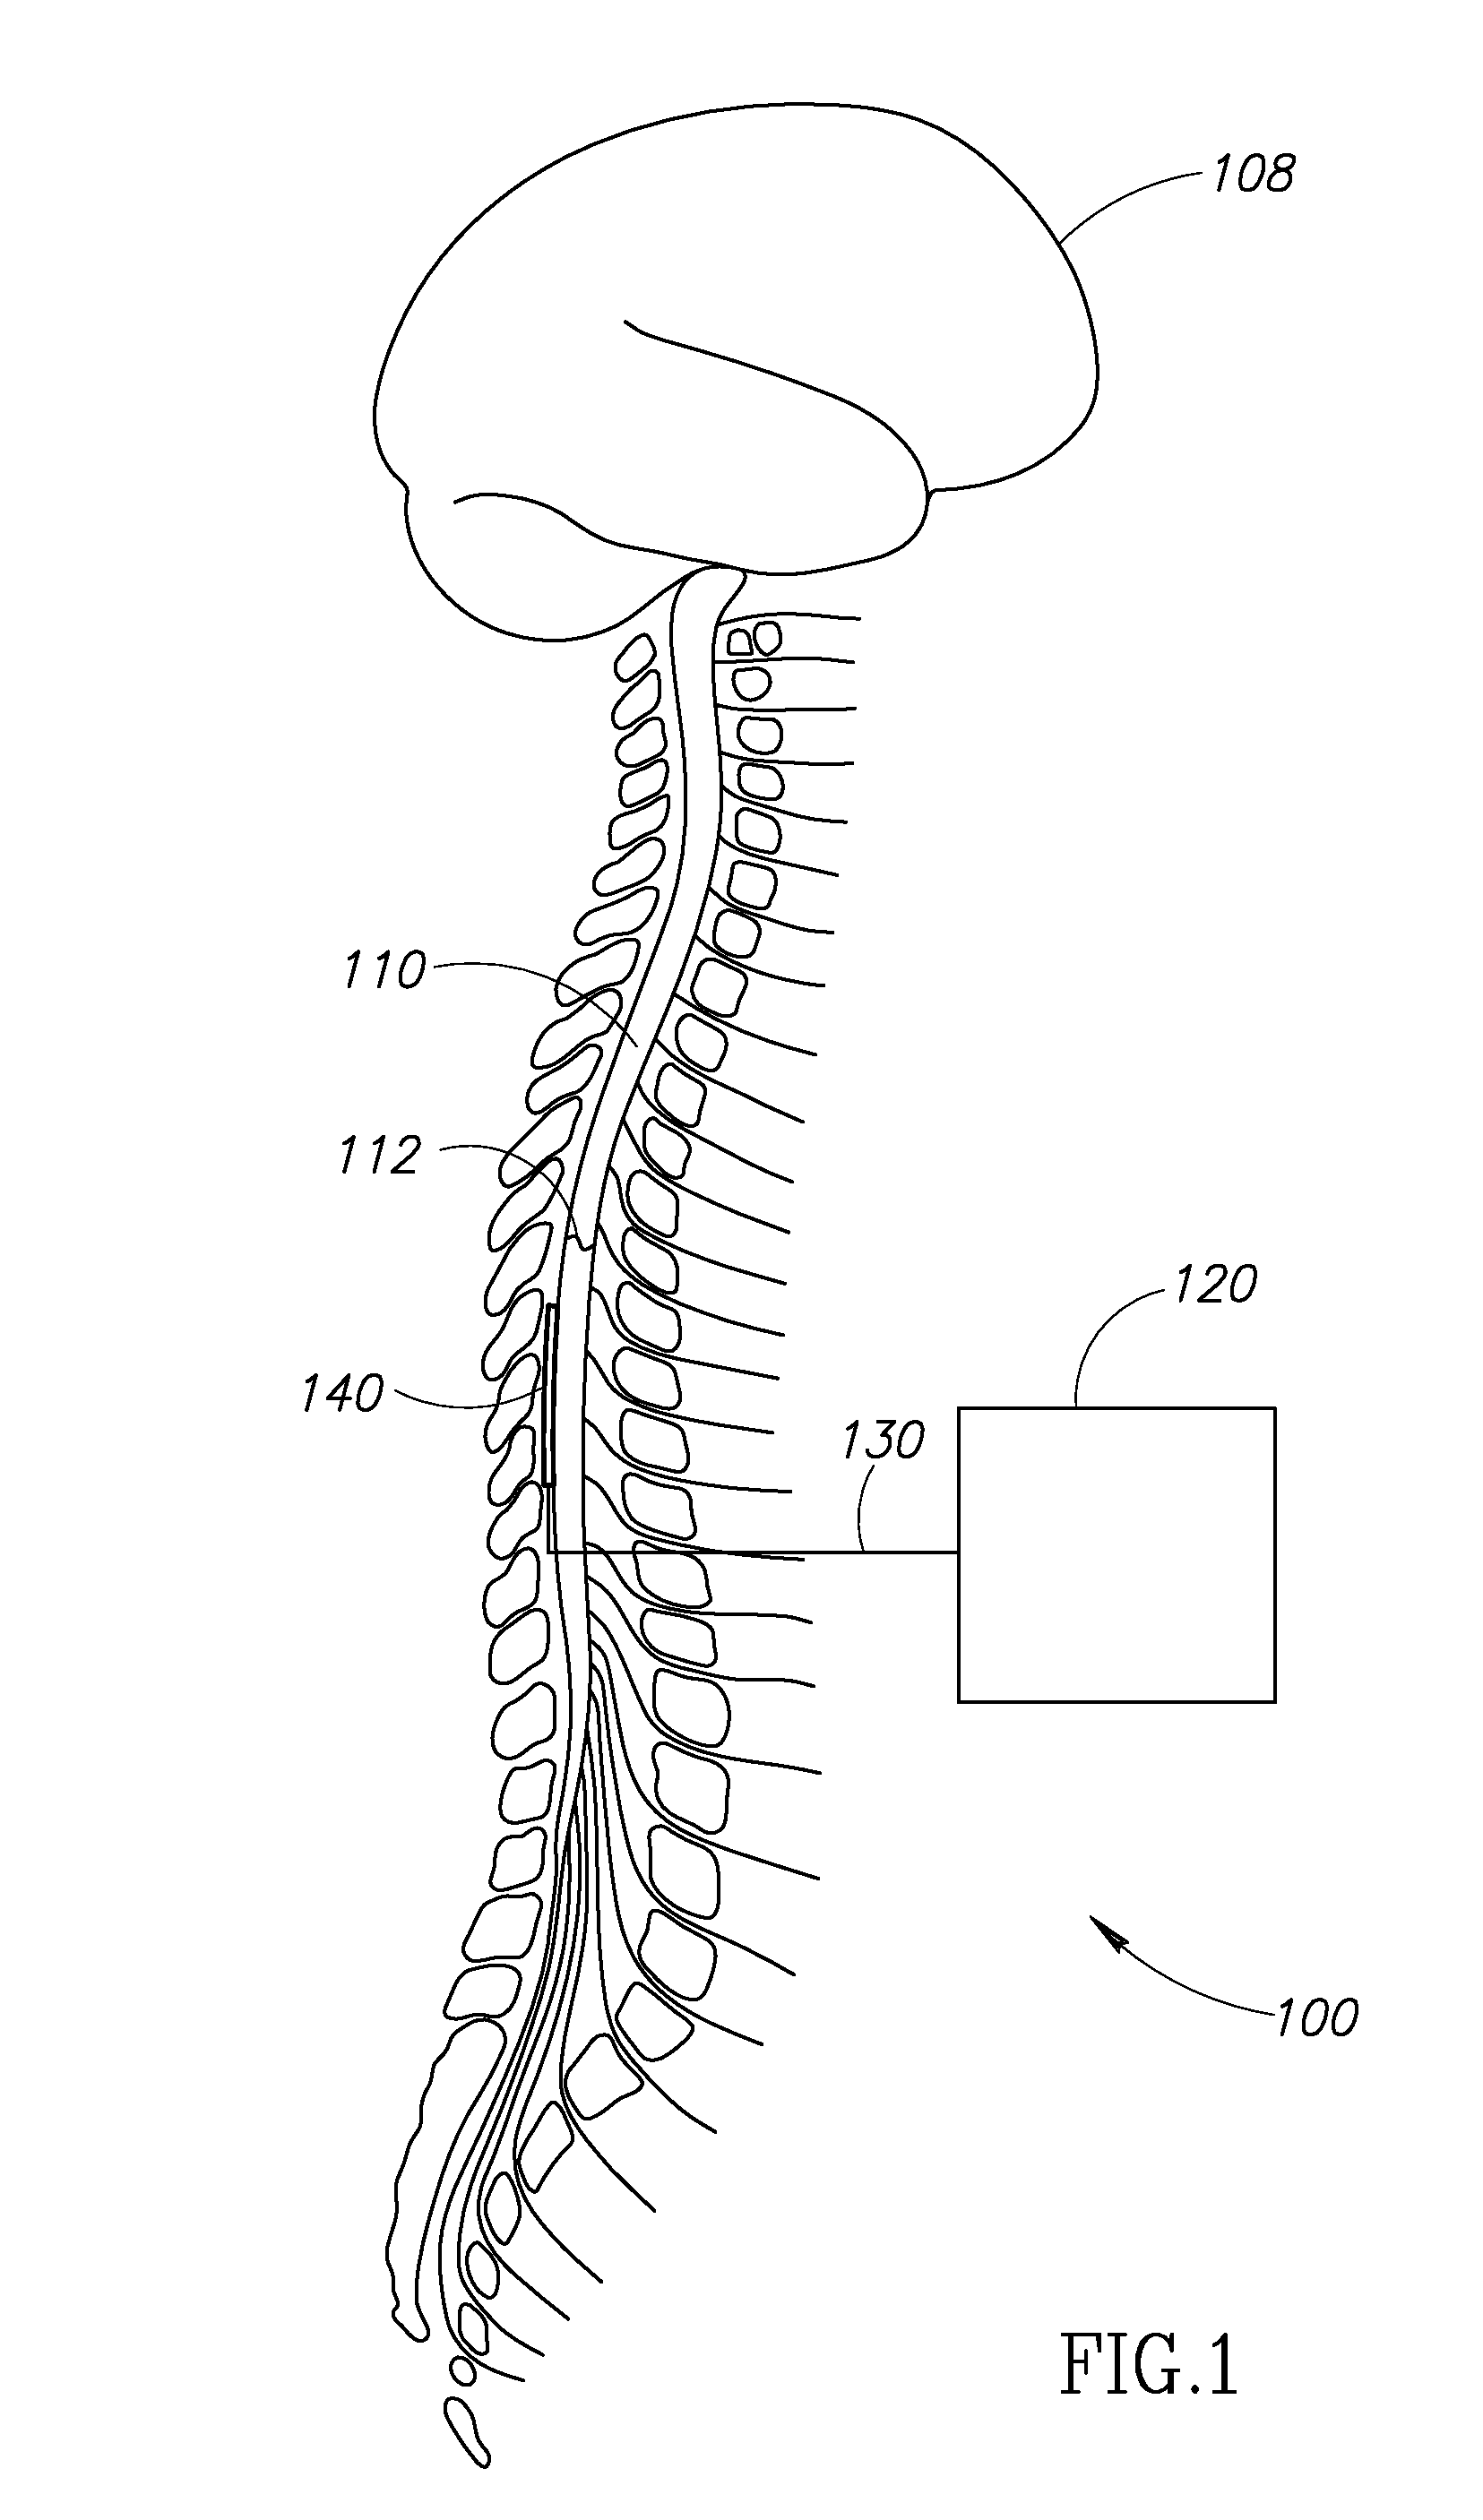 Spinal stimulator systems for restoration of function